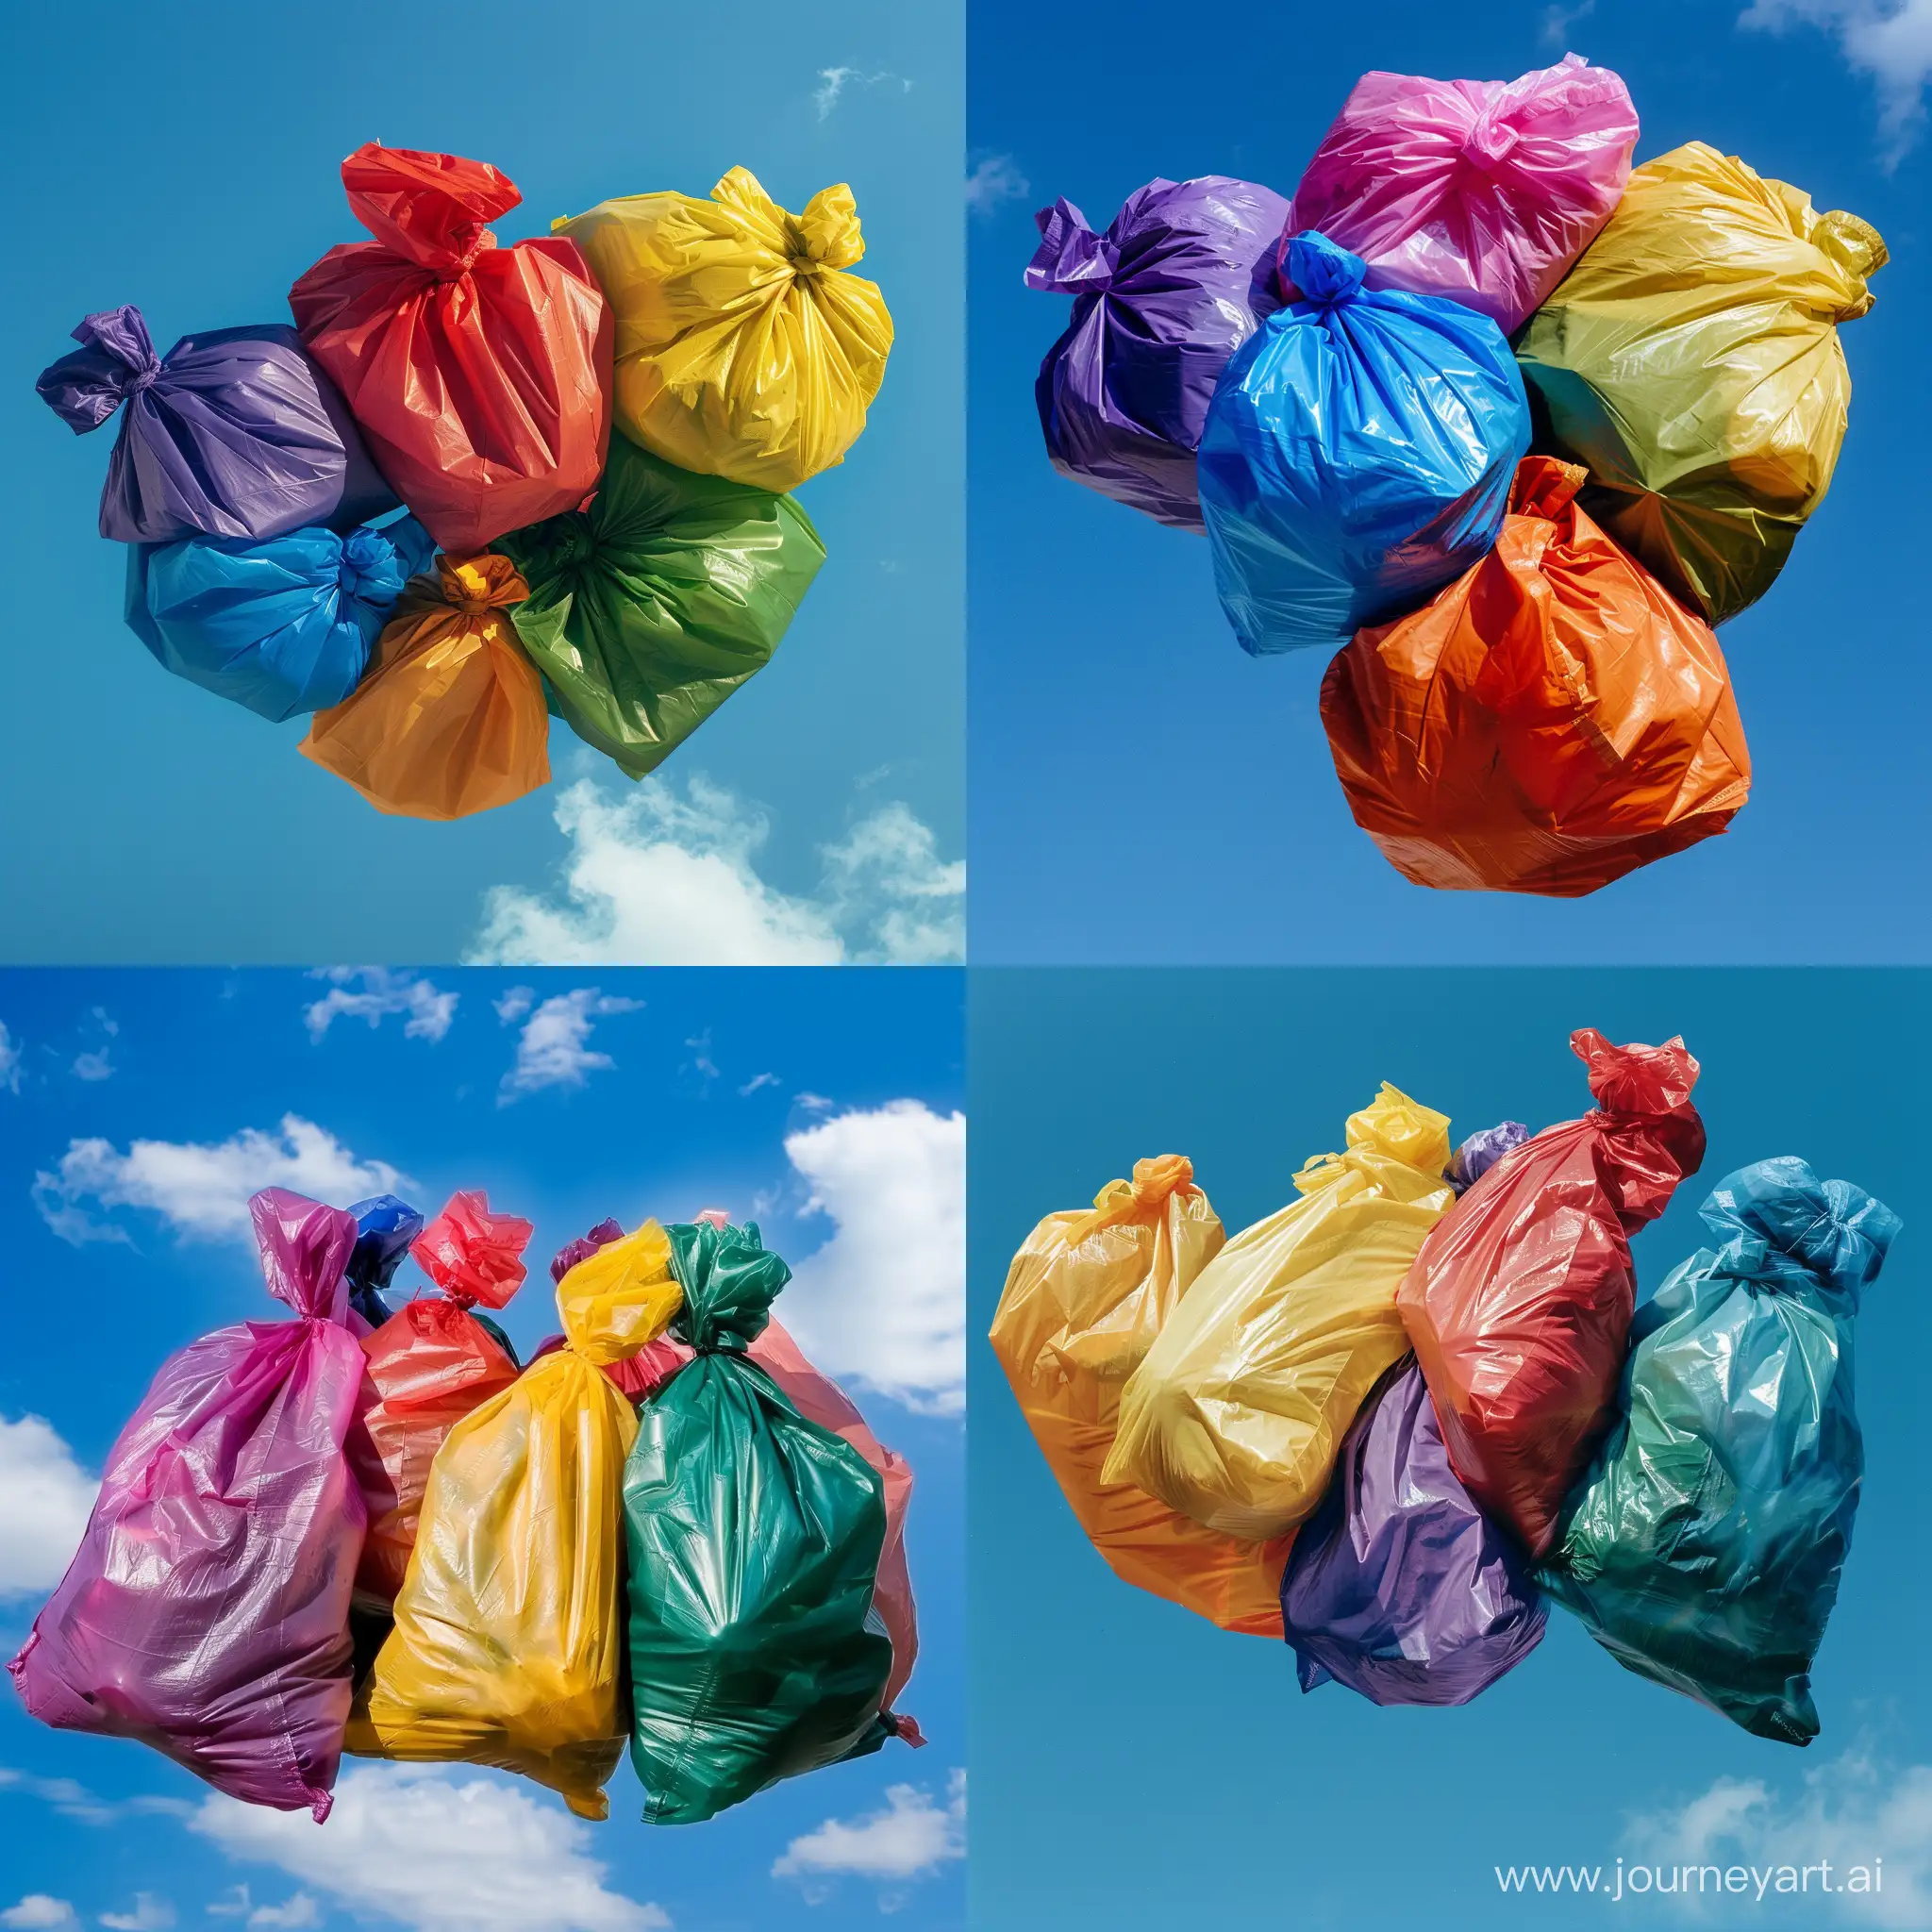 Colored garbage bags in the form of a bunch in the blue sky
